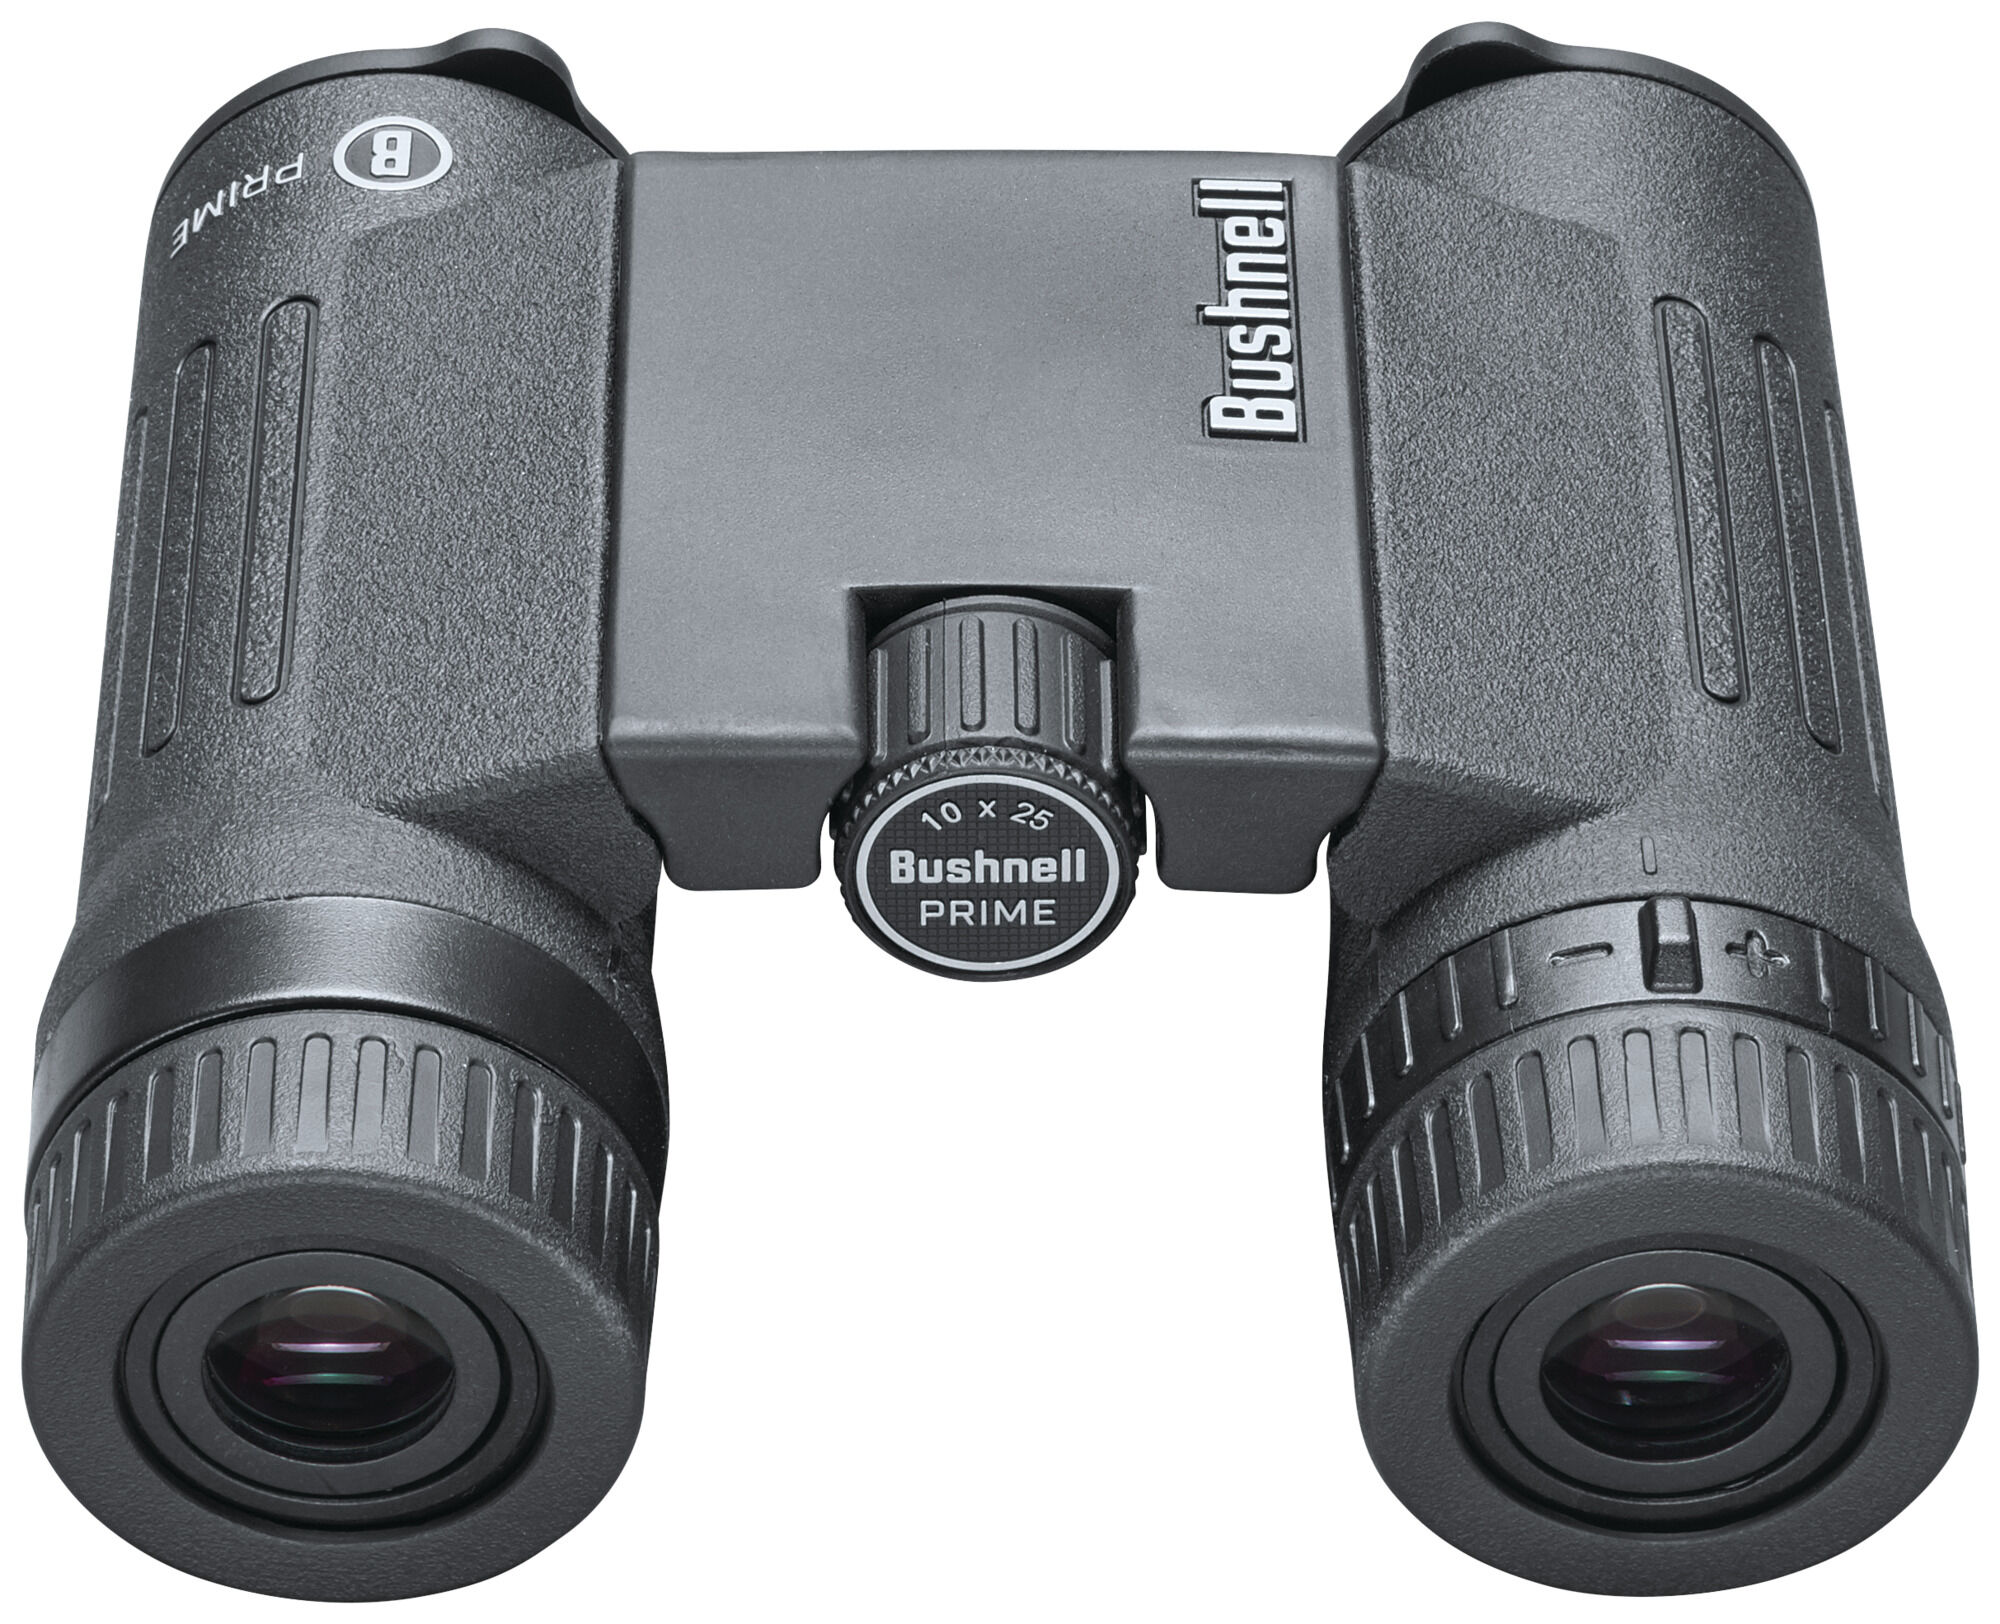 Prime Compact Binoculars, 10x25 Magnification | Bushnell